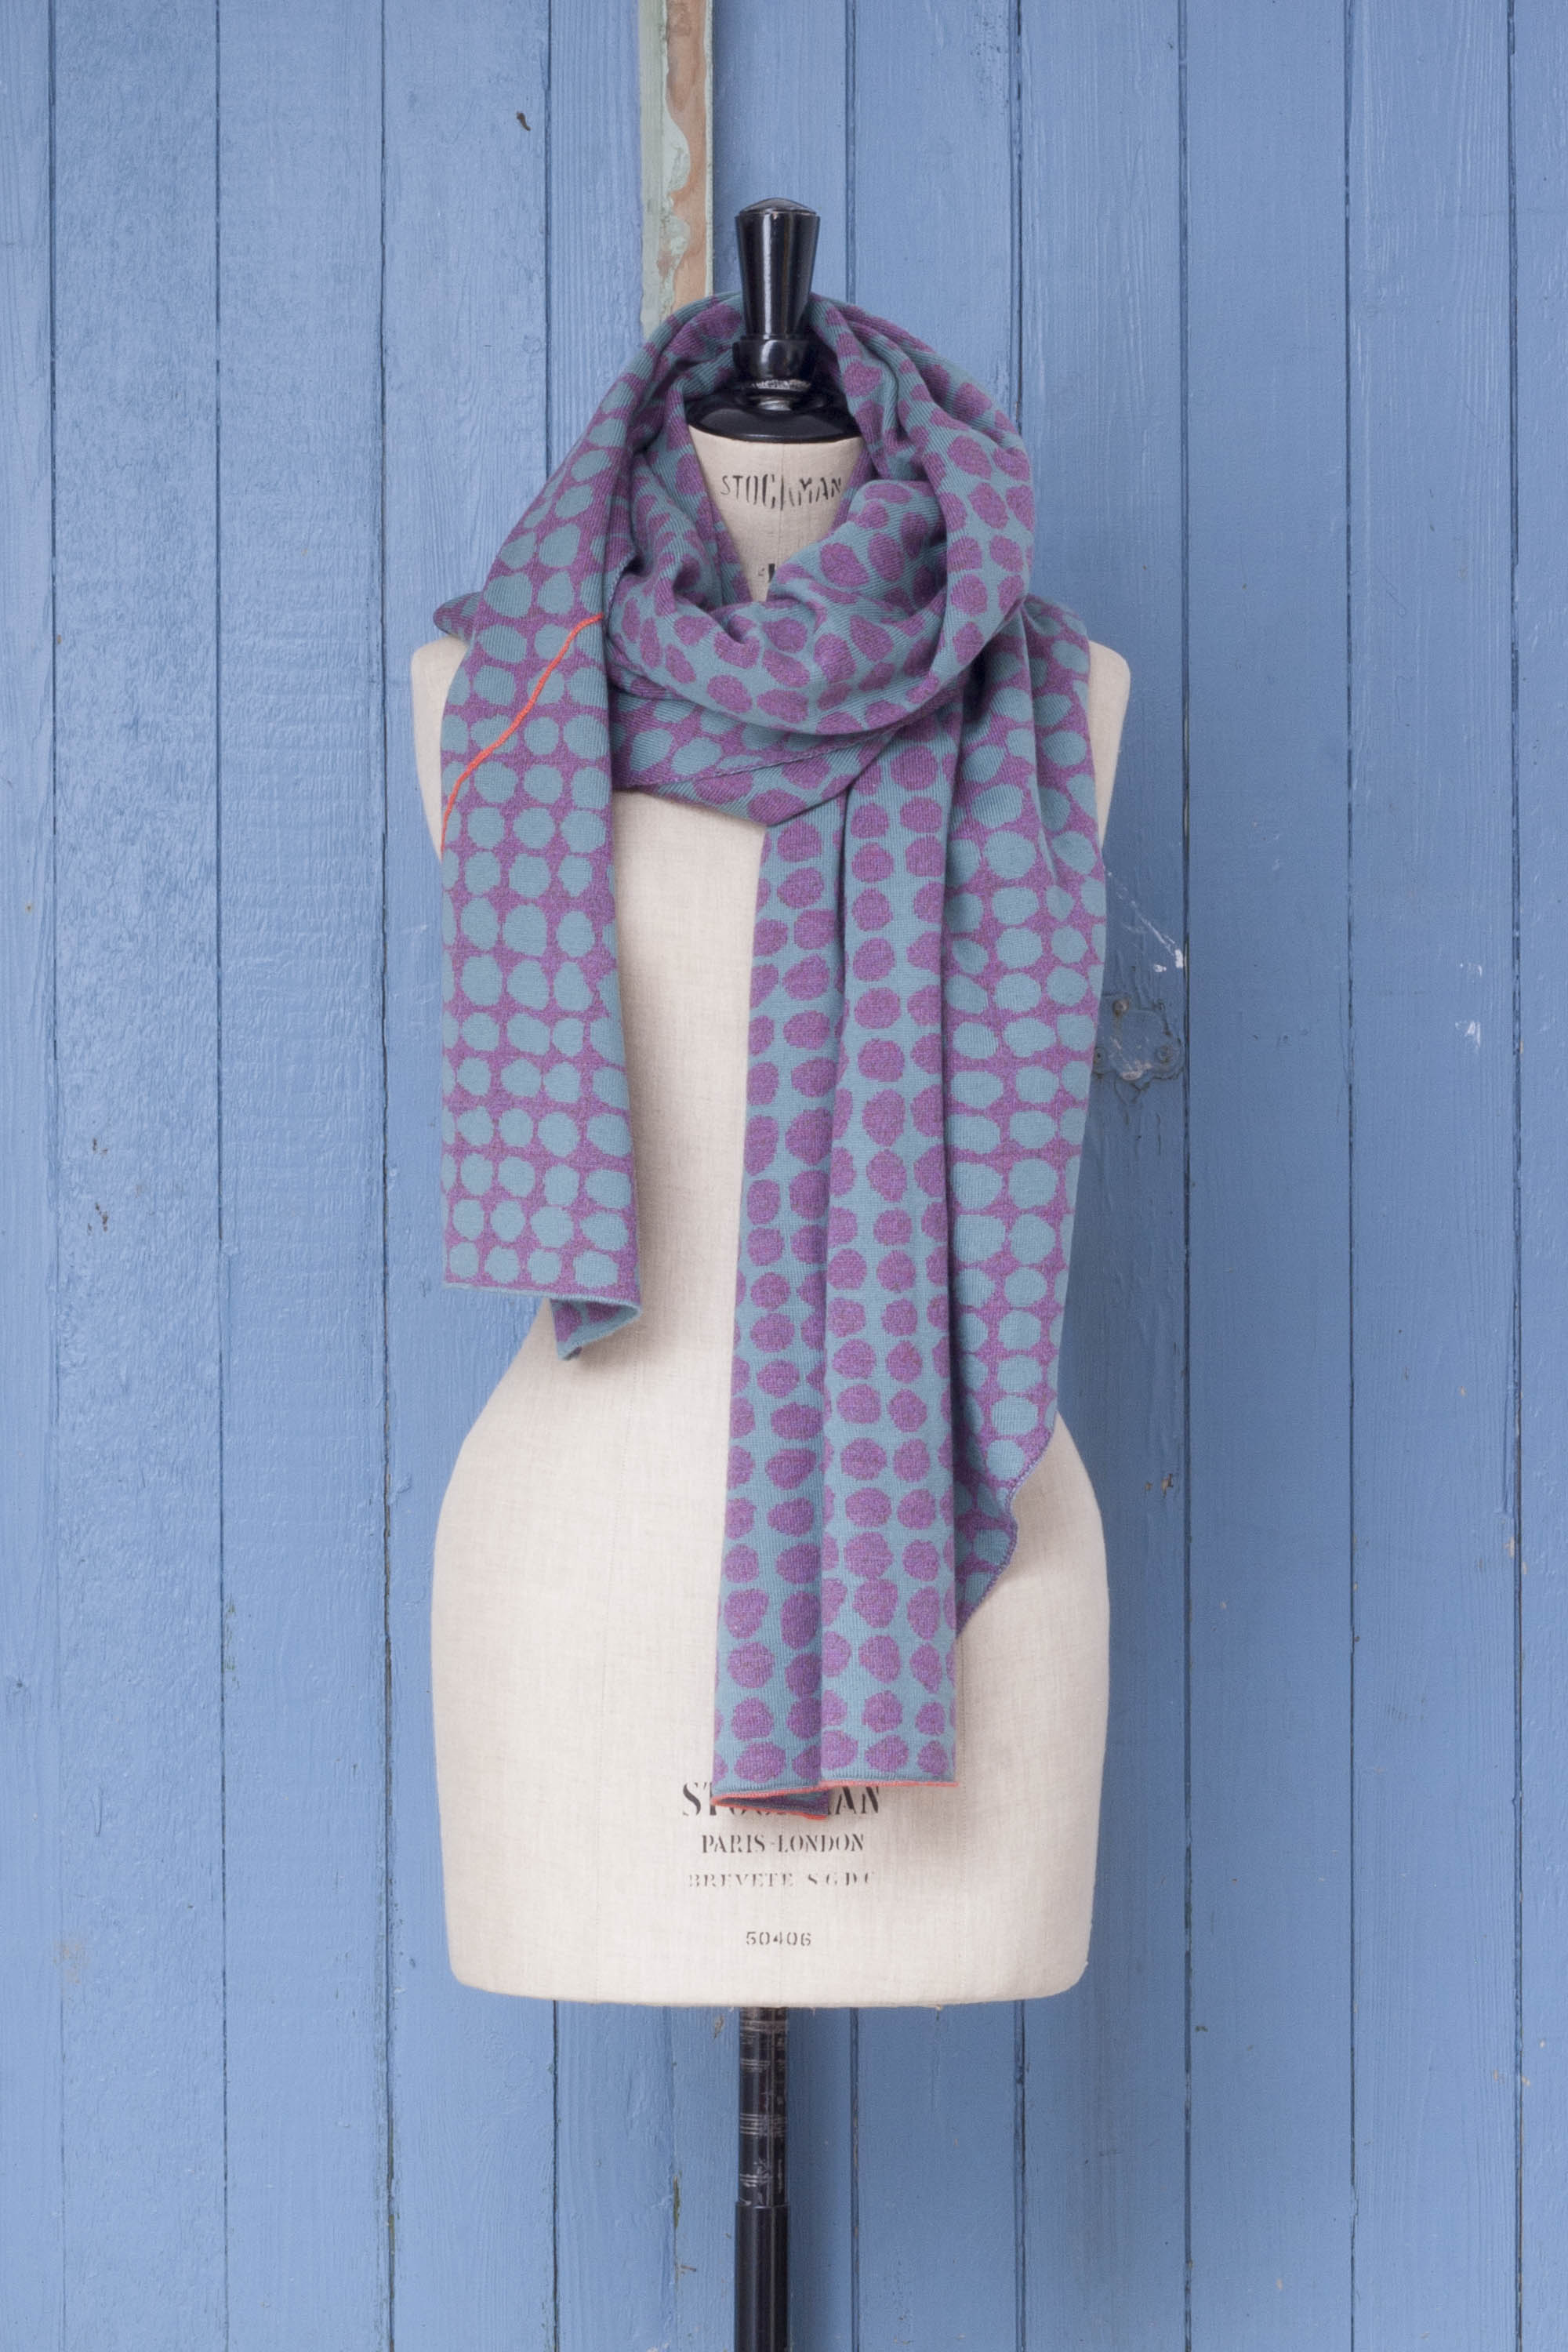 Ebb-stanes contemporary Shetland shawl made in Scotland. Pebble design in lilac and blue with hot pink individually drawn line